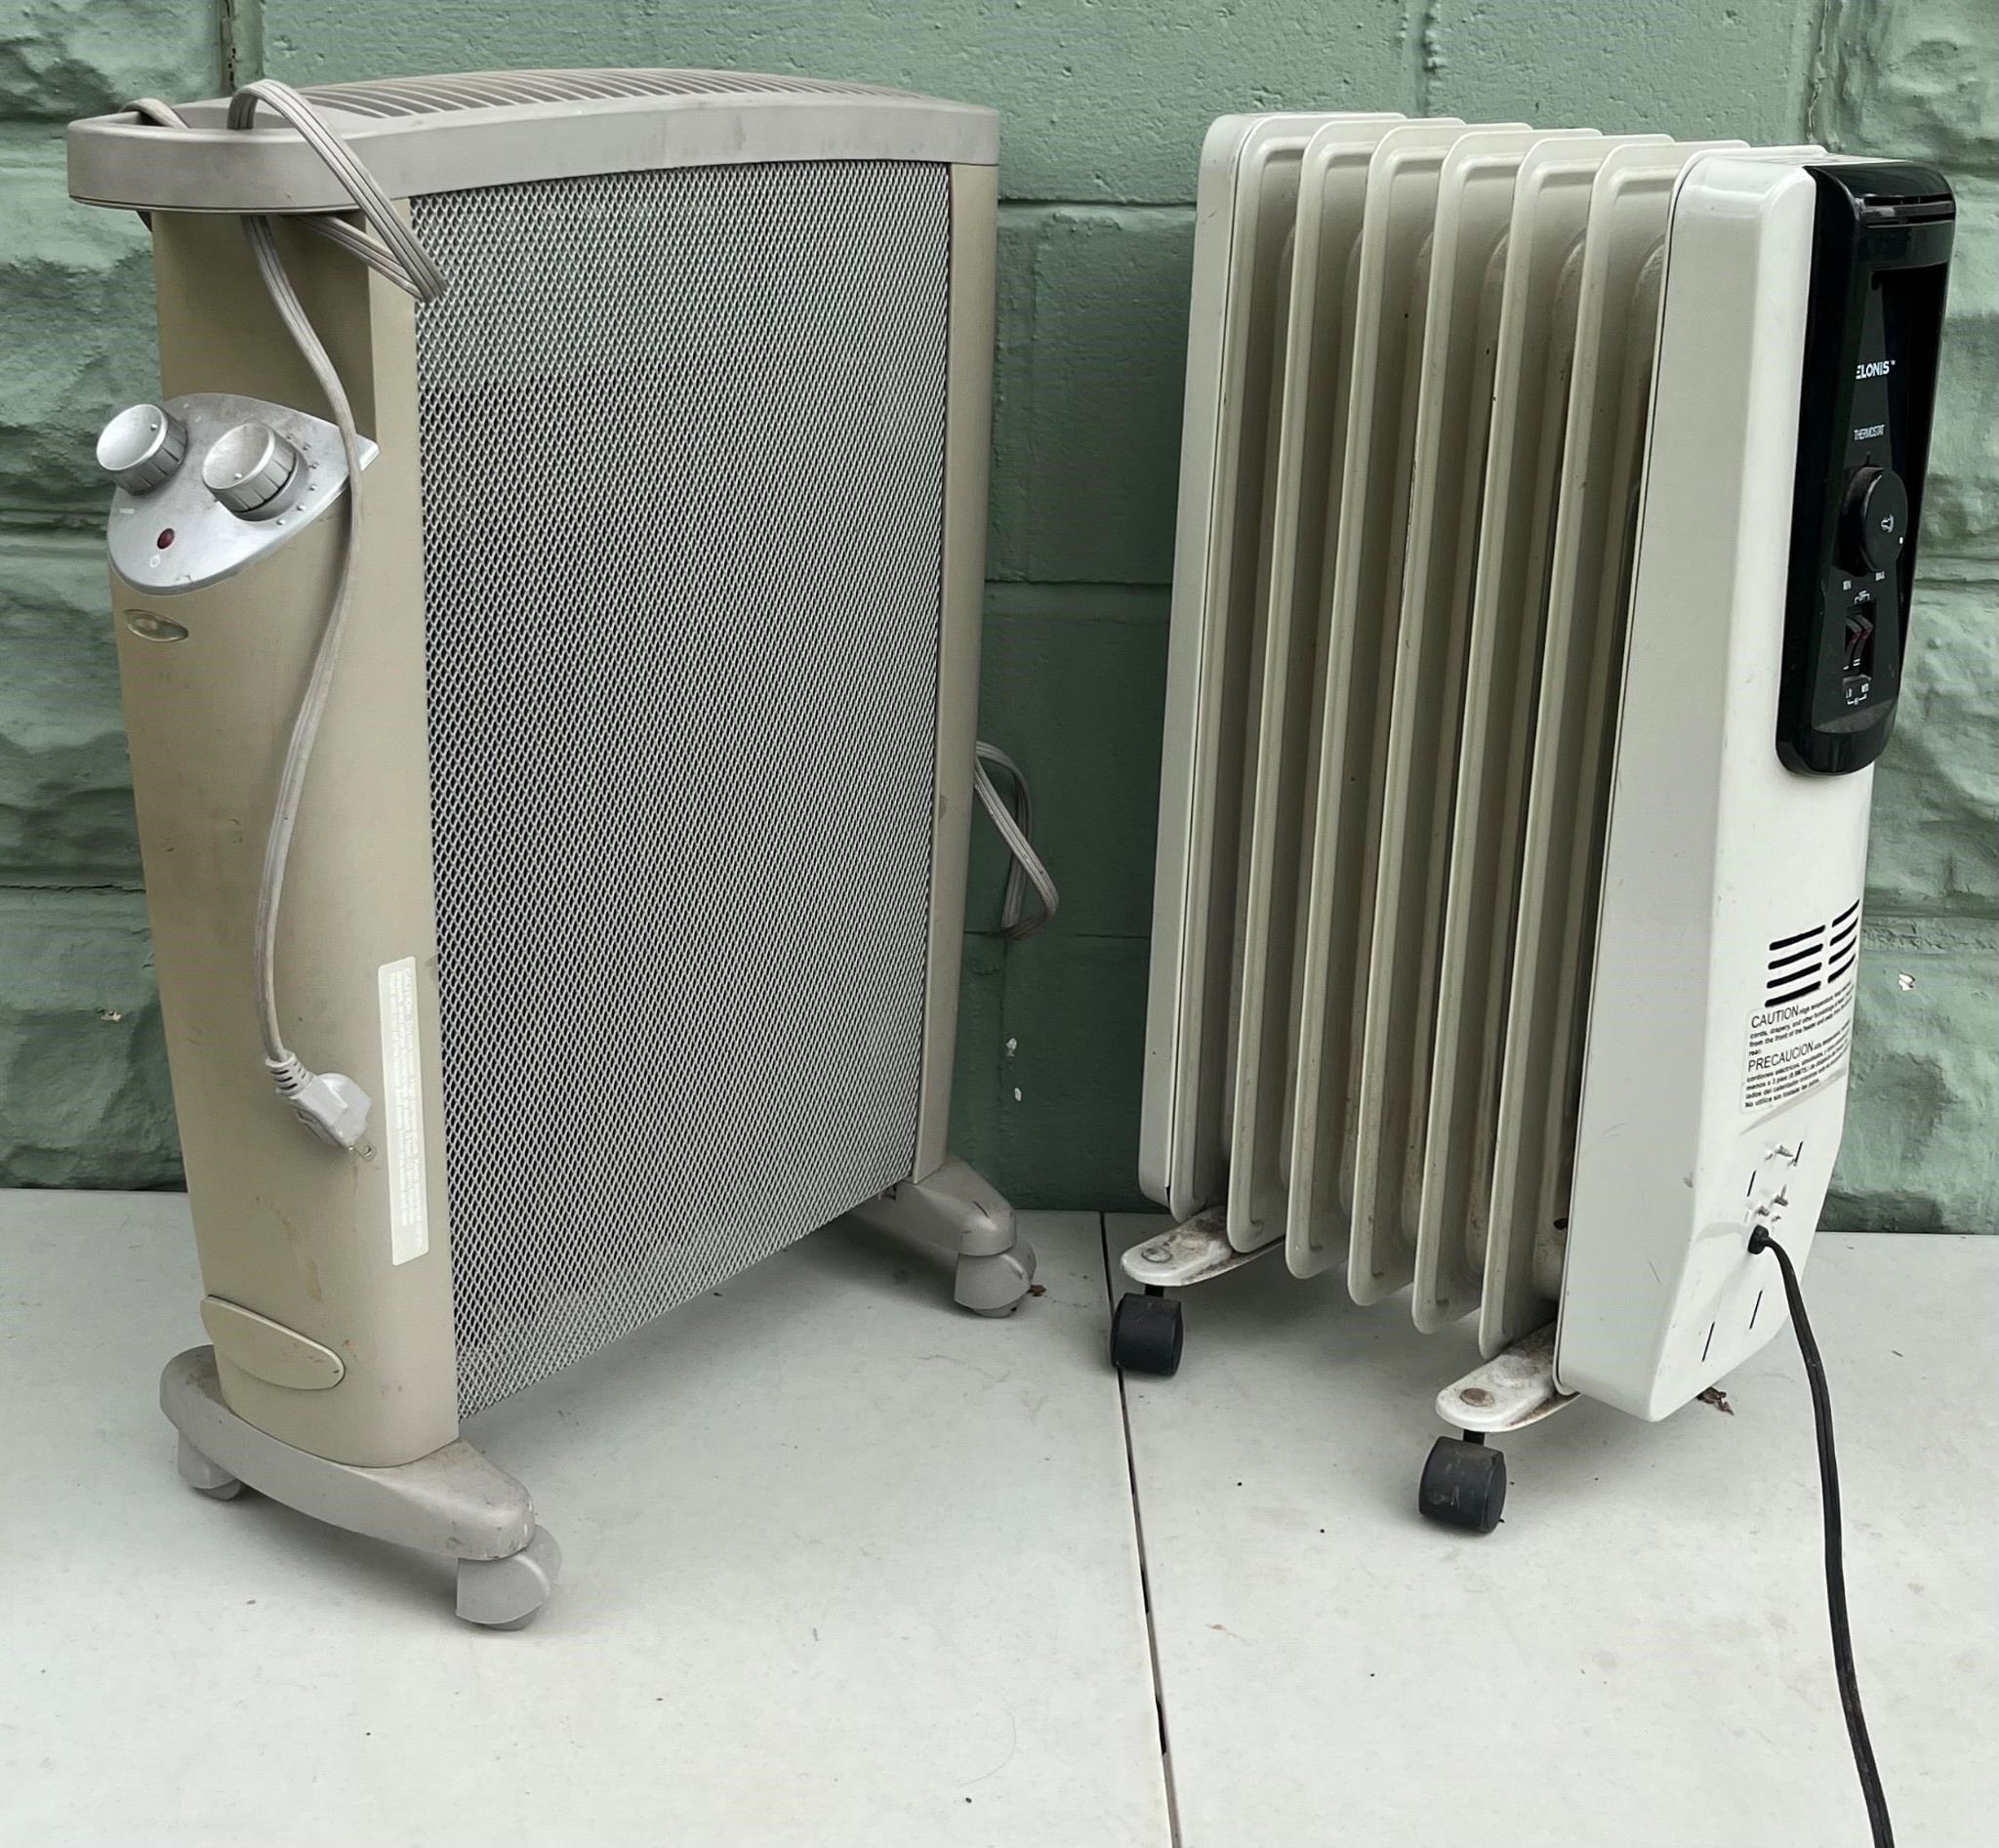 2 ELECTRIC SPACE HEATERS